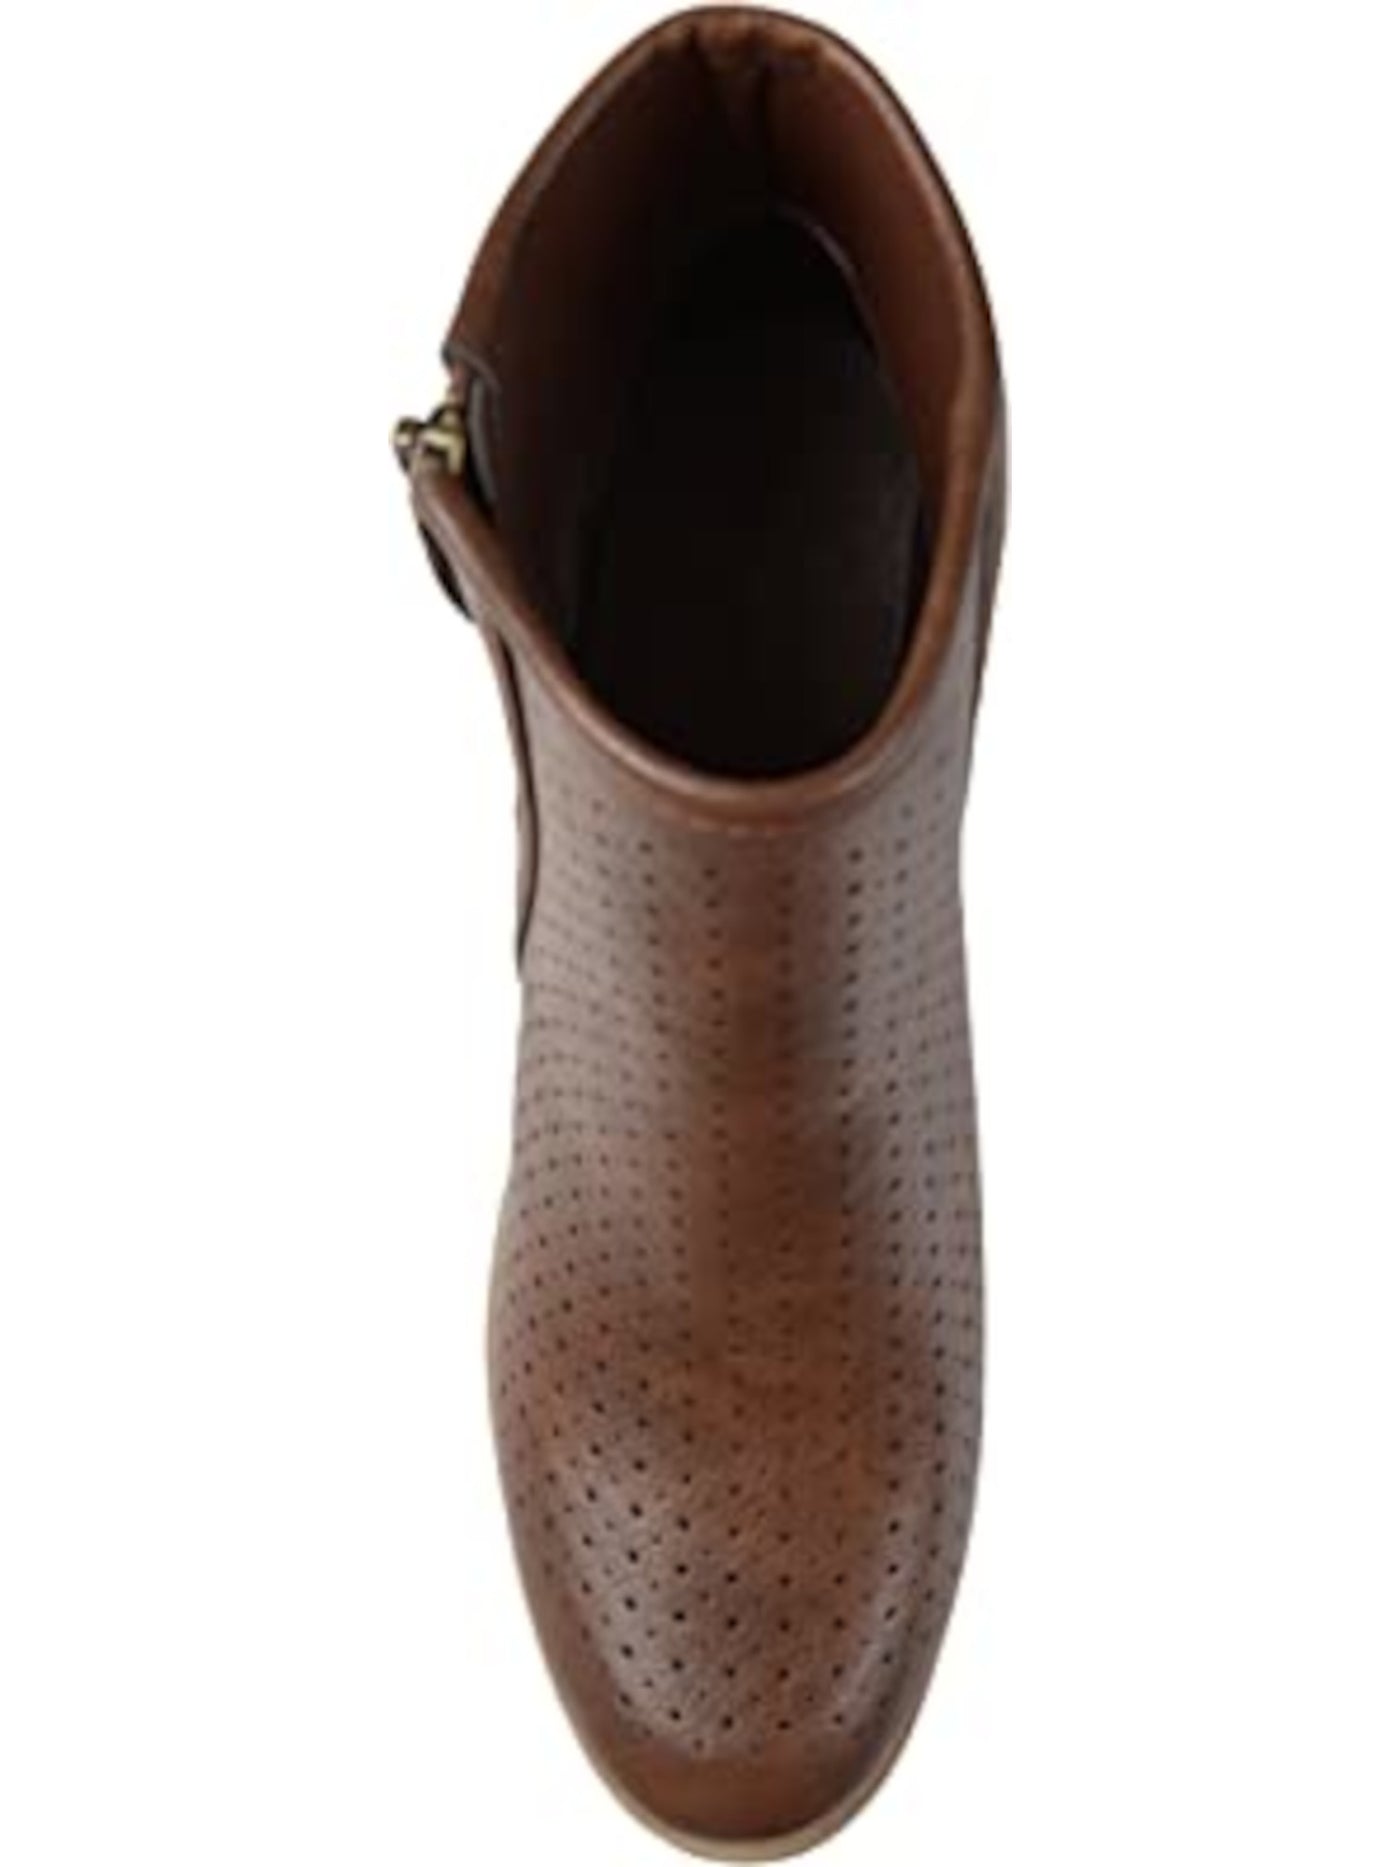 JOURNEE COLLECTION Womens Brown Perforated Comfort Meleny Round Toe Zip-Up Booties 7.5 M